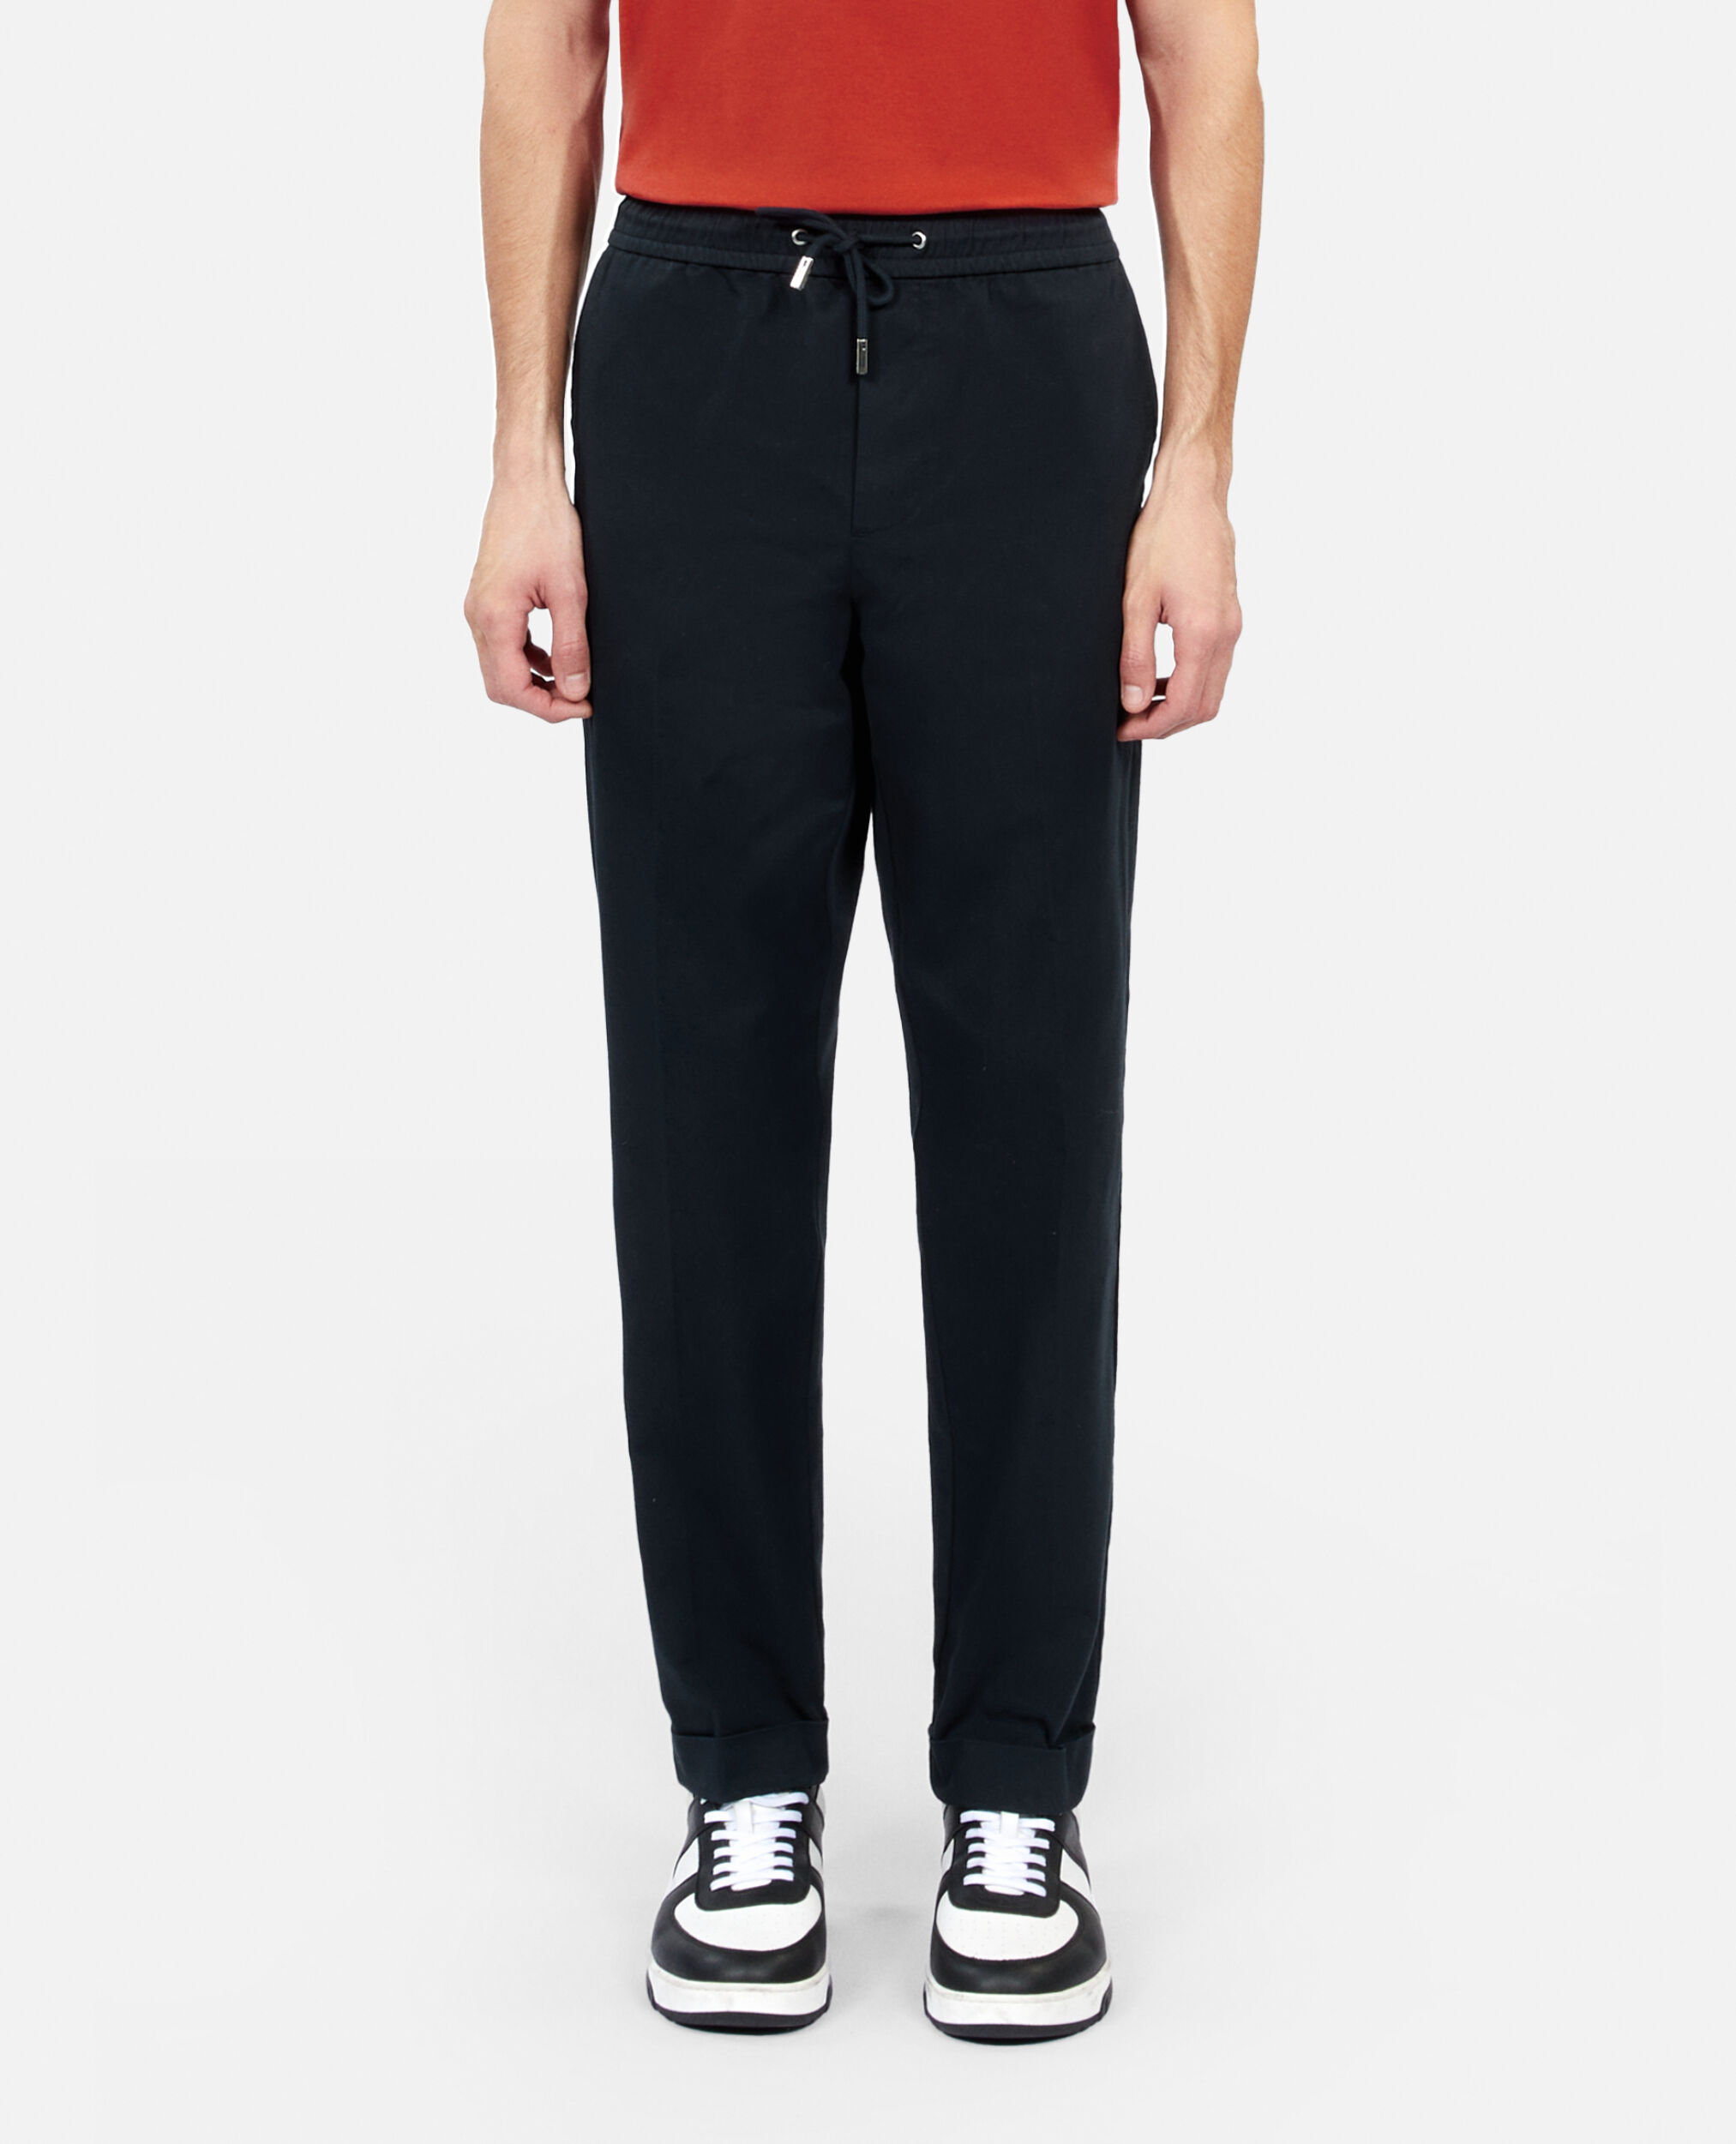 Navy blue cotton trousers, NAVY, hi-res image number null